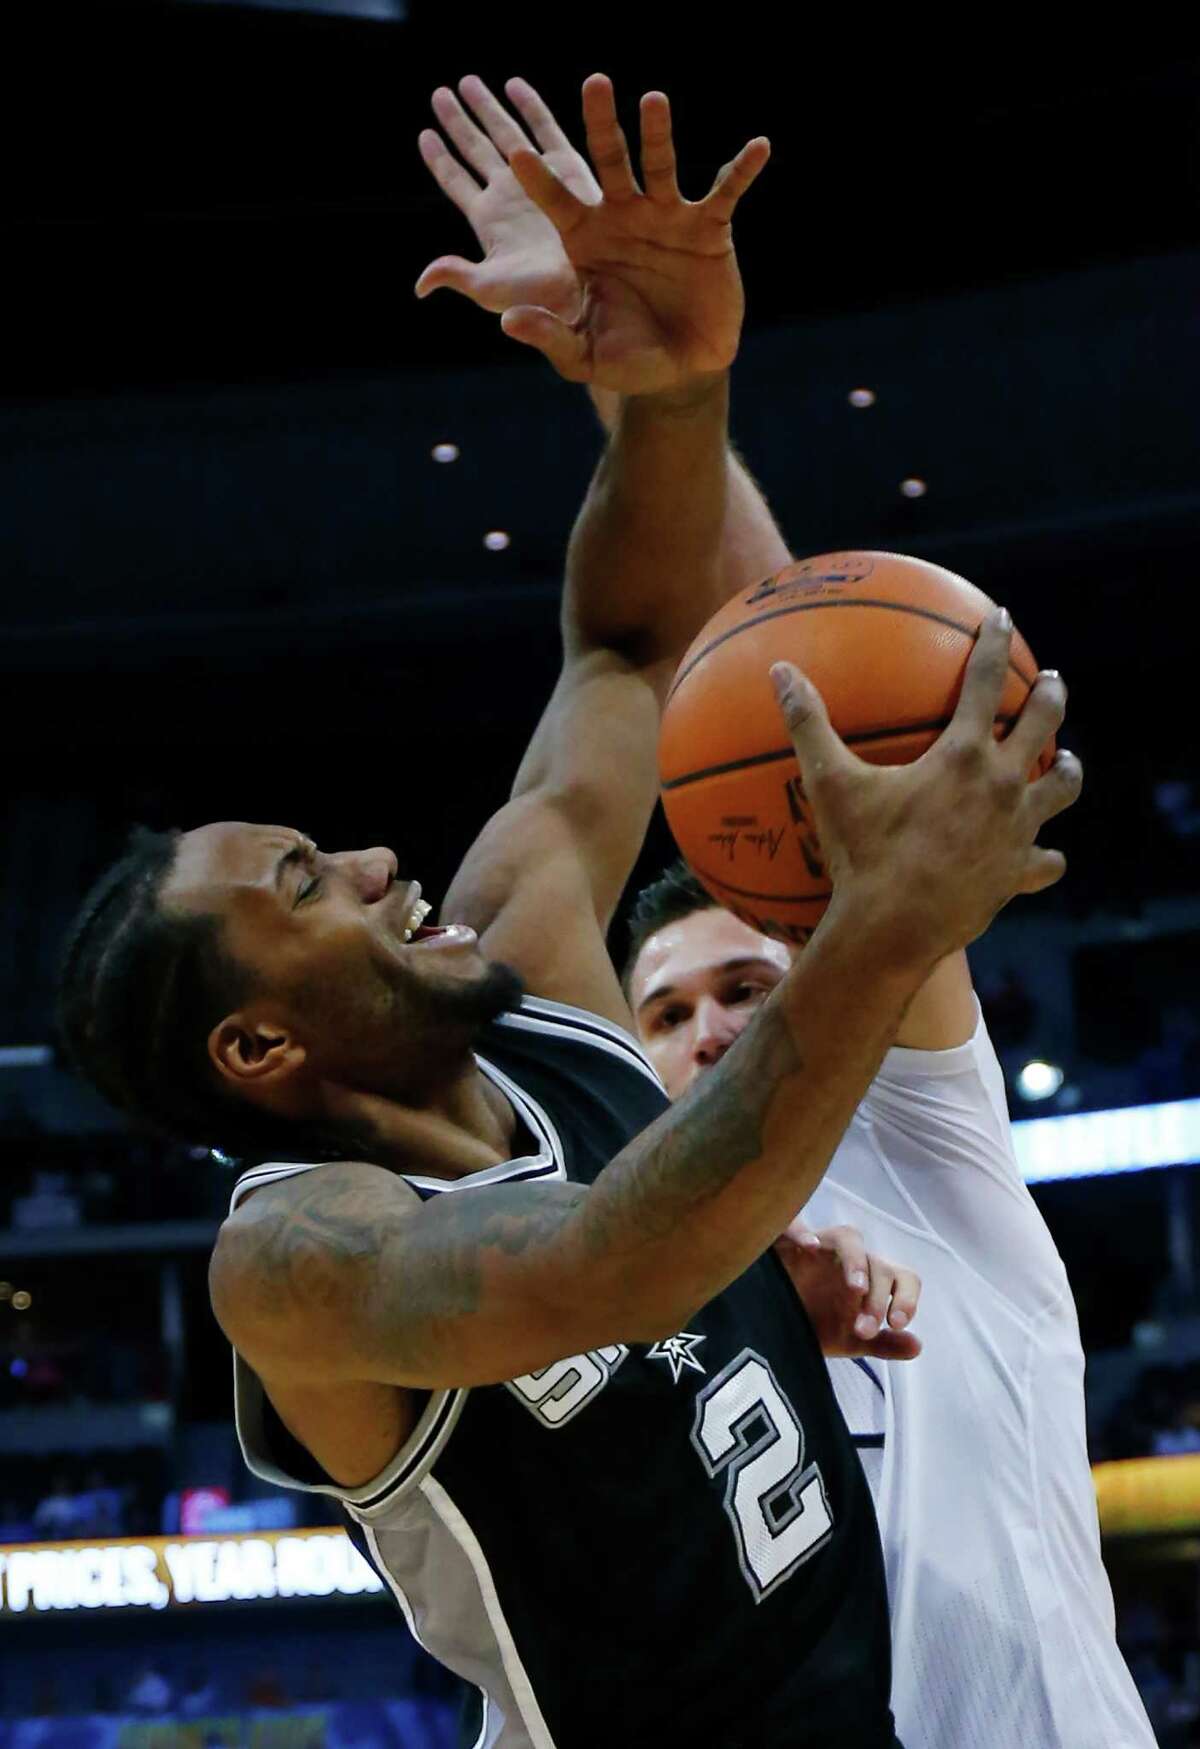 San Antonio Spurs forward Kawhi Leonard (2) goes up to shoot against Denver Nuggets forward Danilo Gallinari, from Italy, applies pressure during the fourth quarter of an NBA basketball game Friday, Nov. 27, 2015, in Denver. (AP Photo/Jack Dempsey)